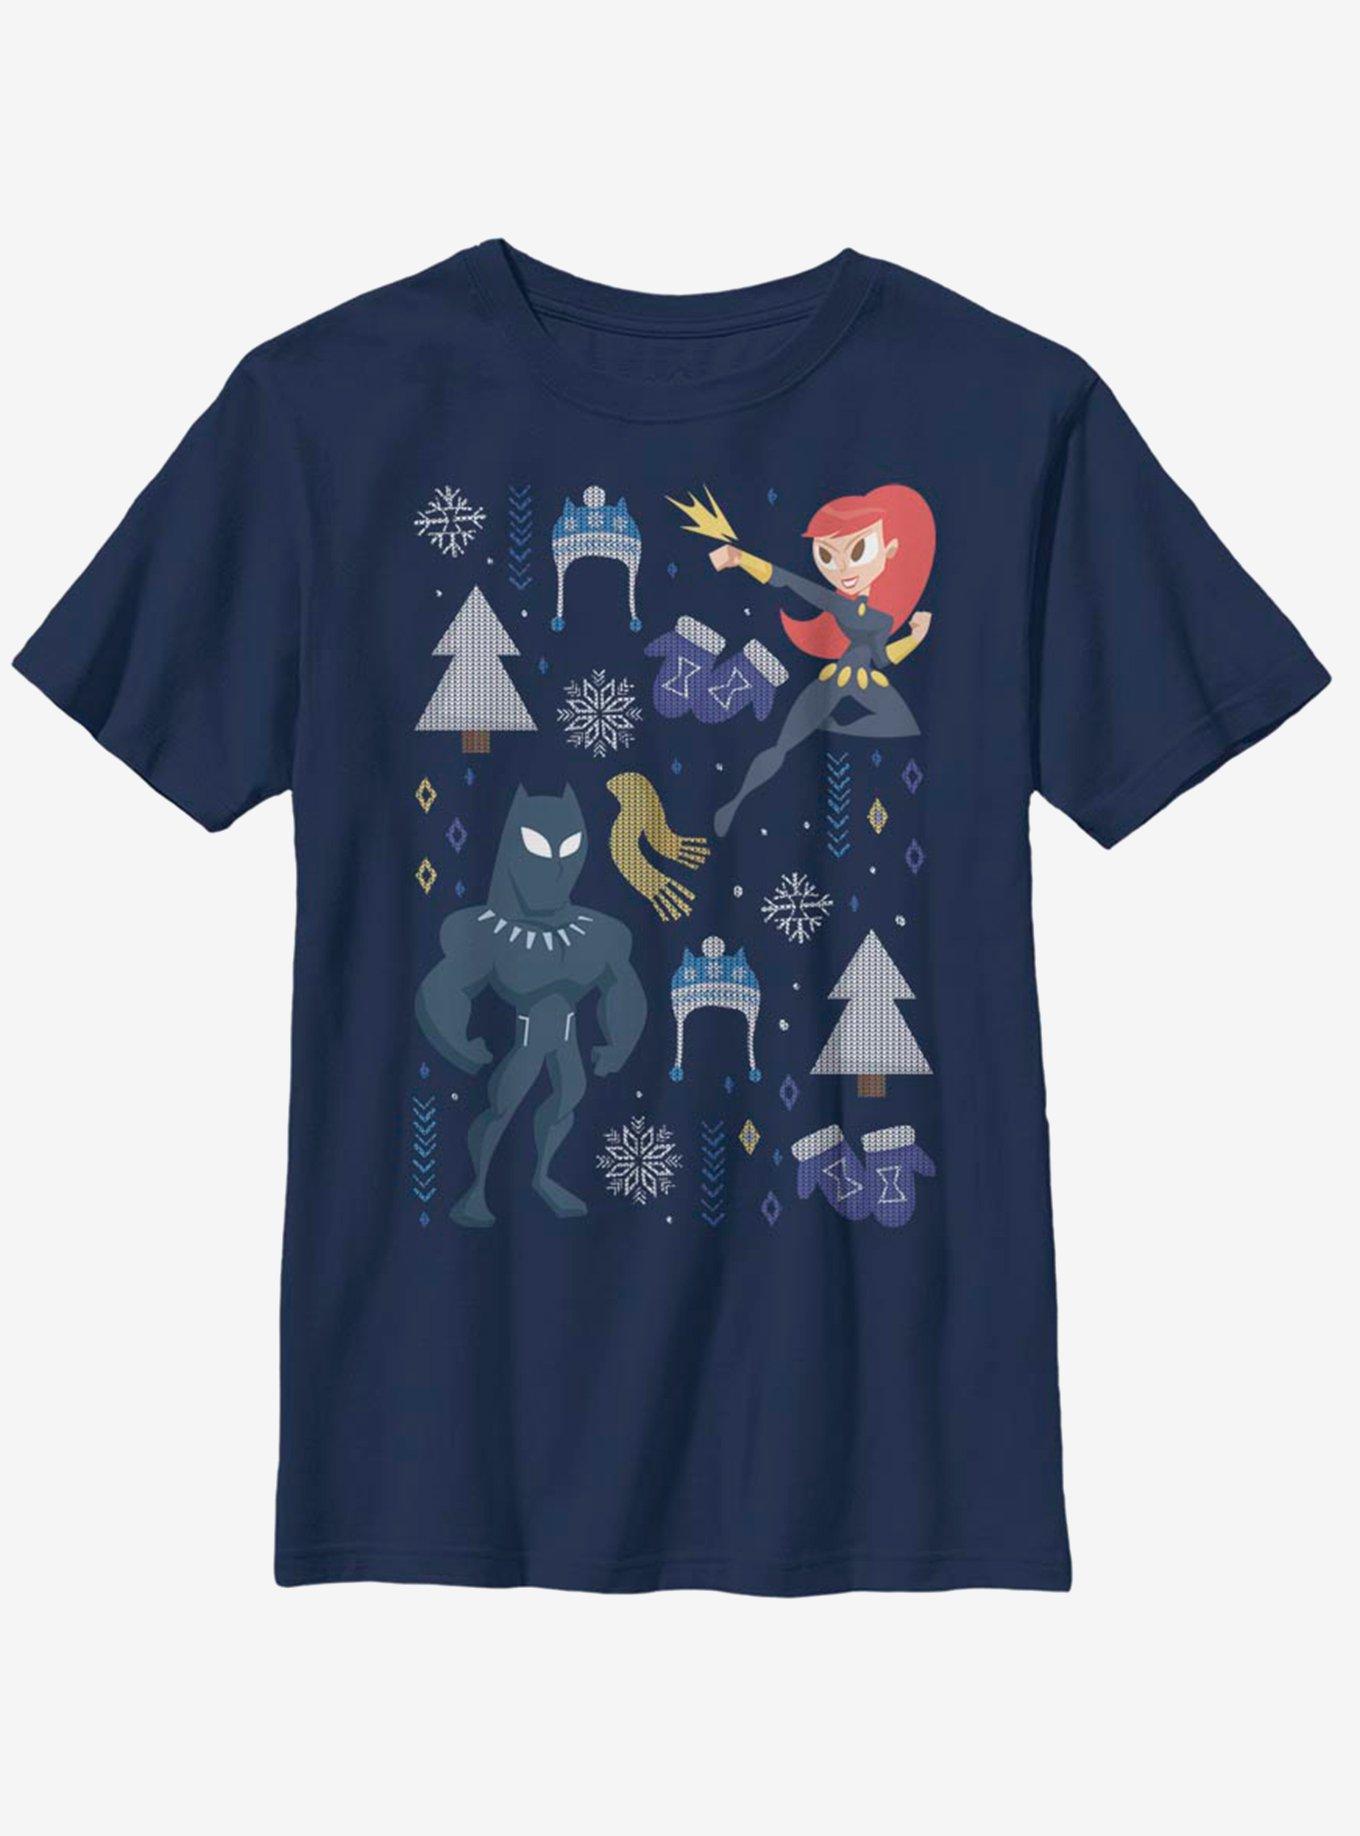 Marvel Black Panther Christmas Icons Youth T-Shirt, NAVY, hi-res